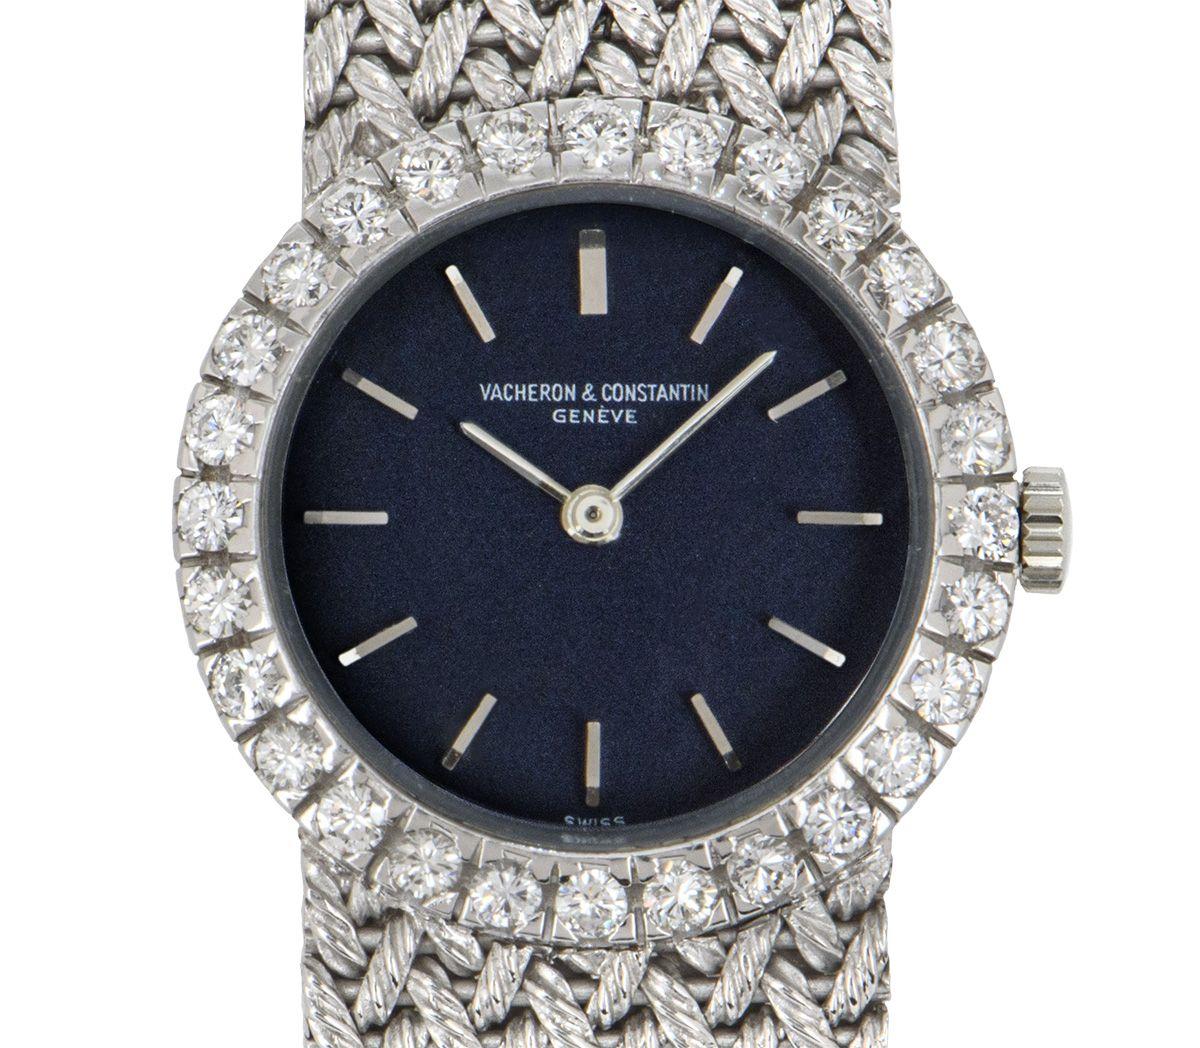 A 23 mm vintage white gold cocktail dress watch by Vacheron Constantin, featuring a blue dial with applied hour markers. The bezel is adorned with 28 round brilliant cut diamonds. Bringing the white gold integrated bracelet together is a concealed